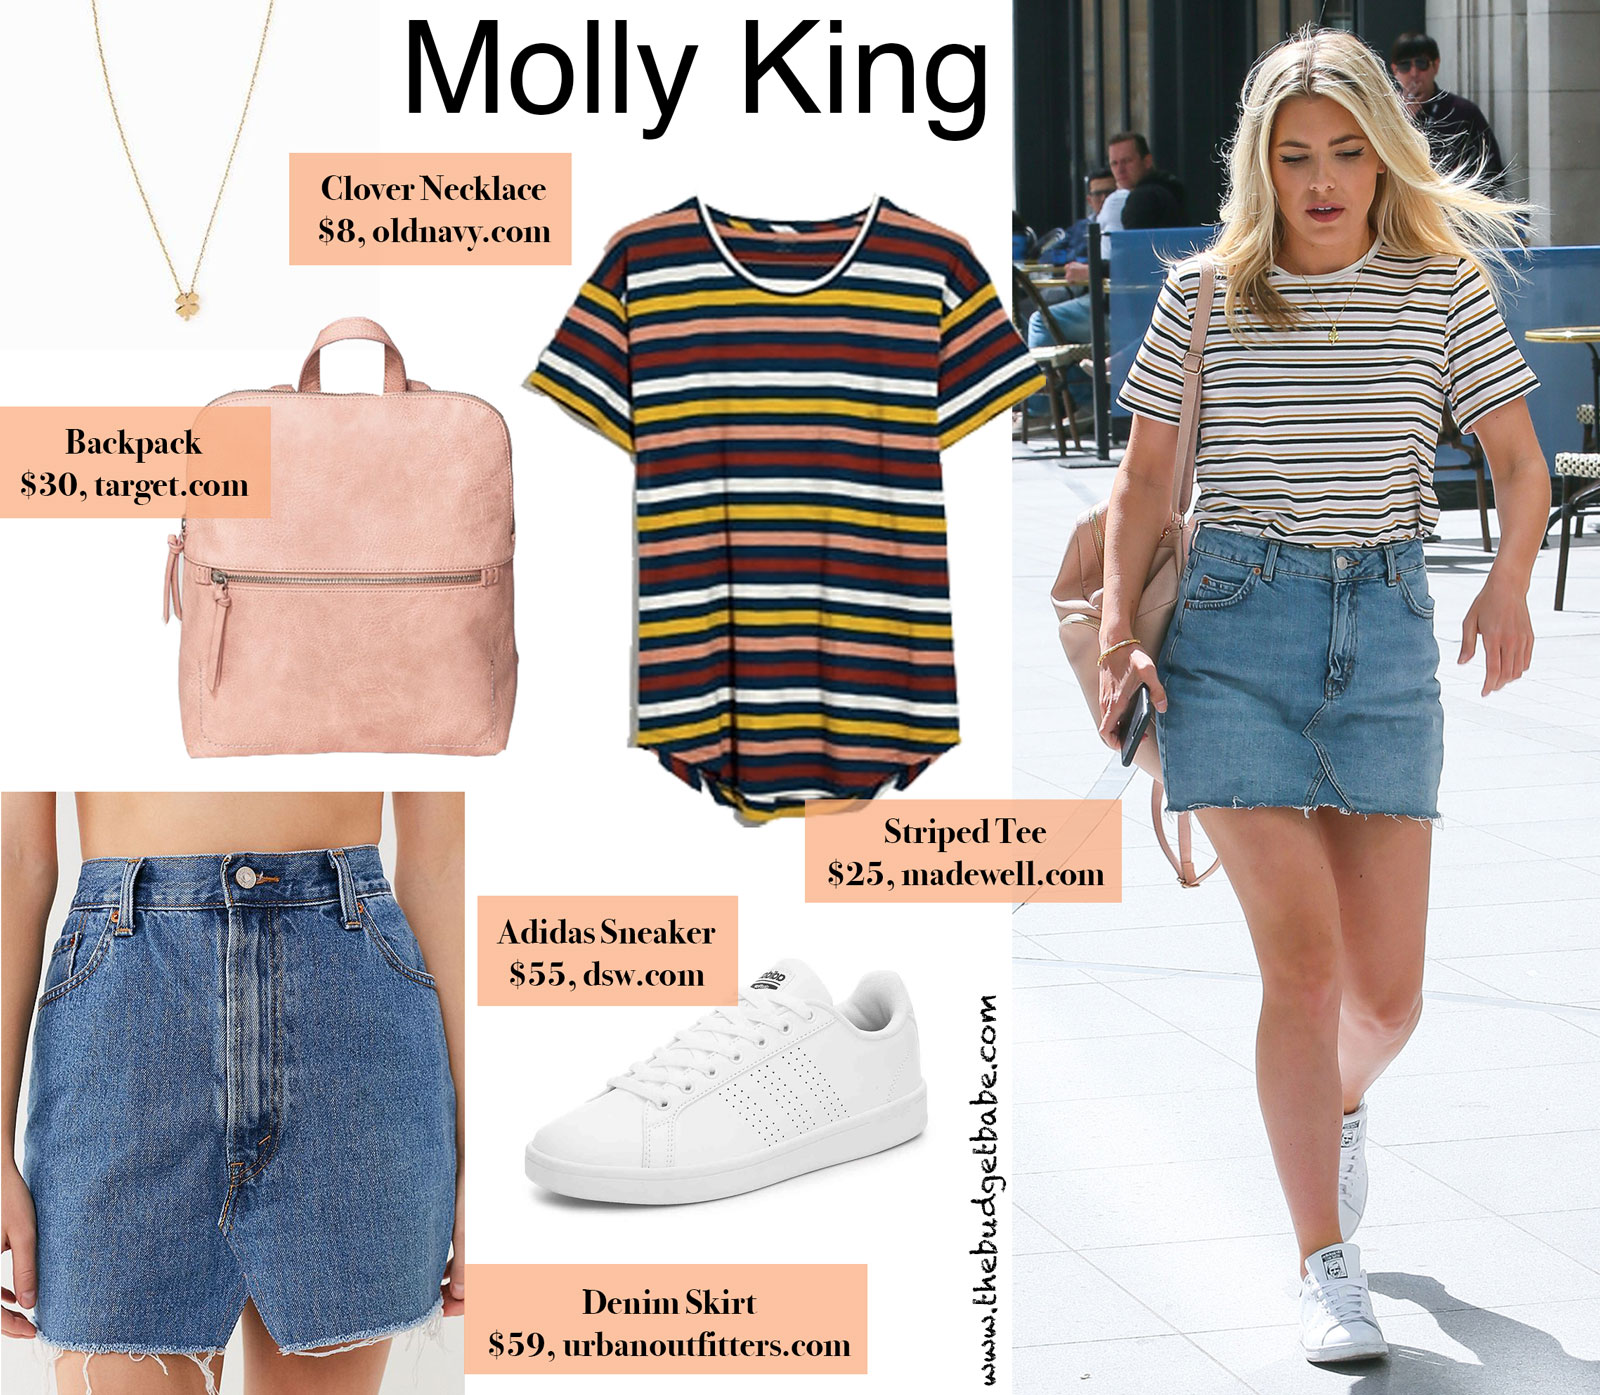 Molly King Denim Skirt Striped Tee Look for Less